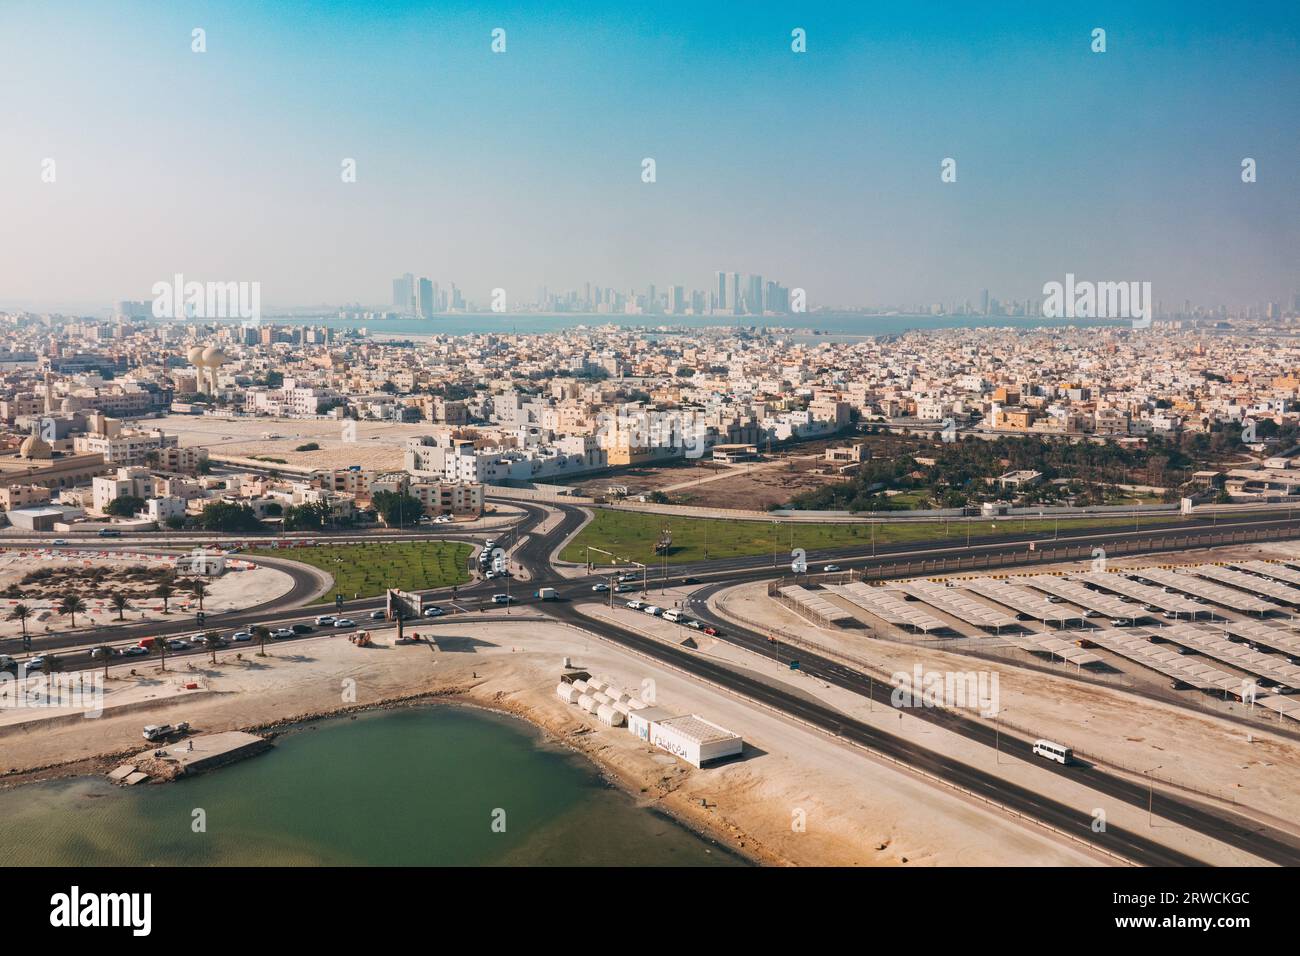 an aerial view of the township of Muharraq, near Bahrain International Airport. Manama city can be seen in the distance across the bay Stock Photo